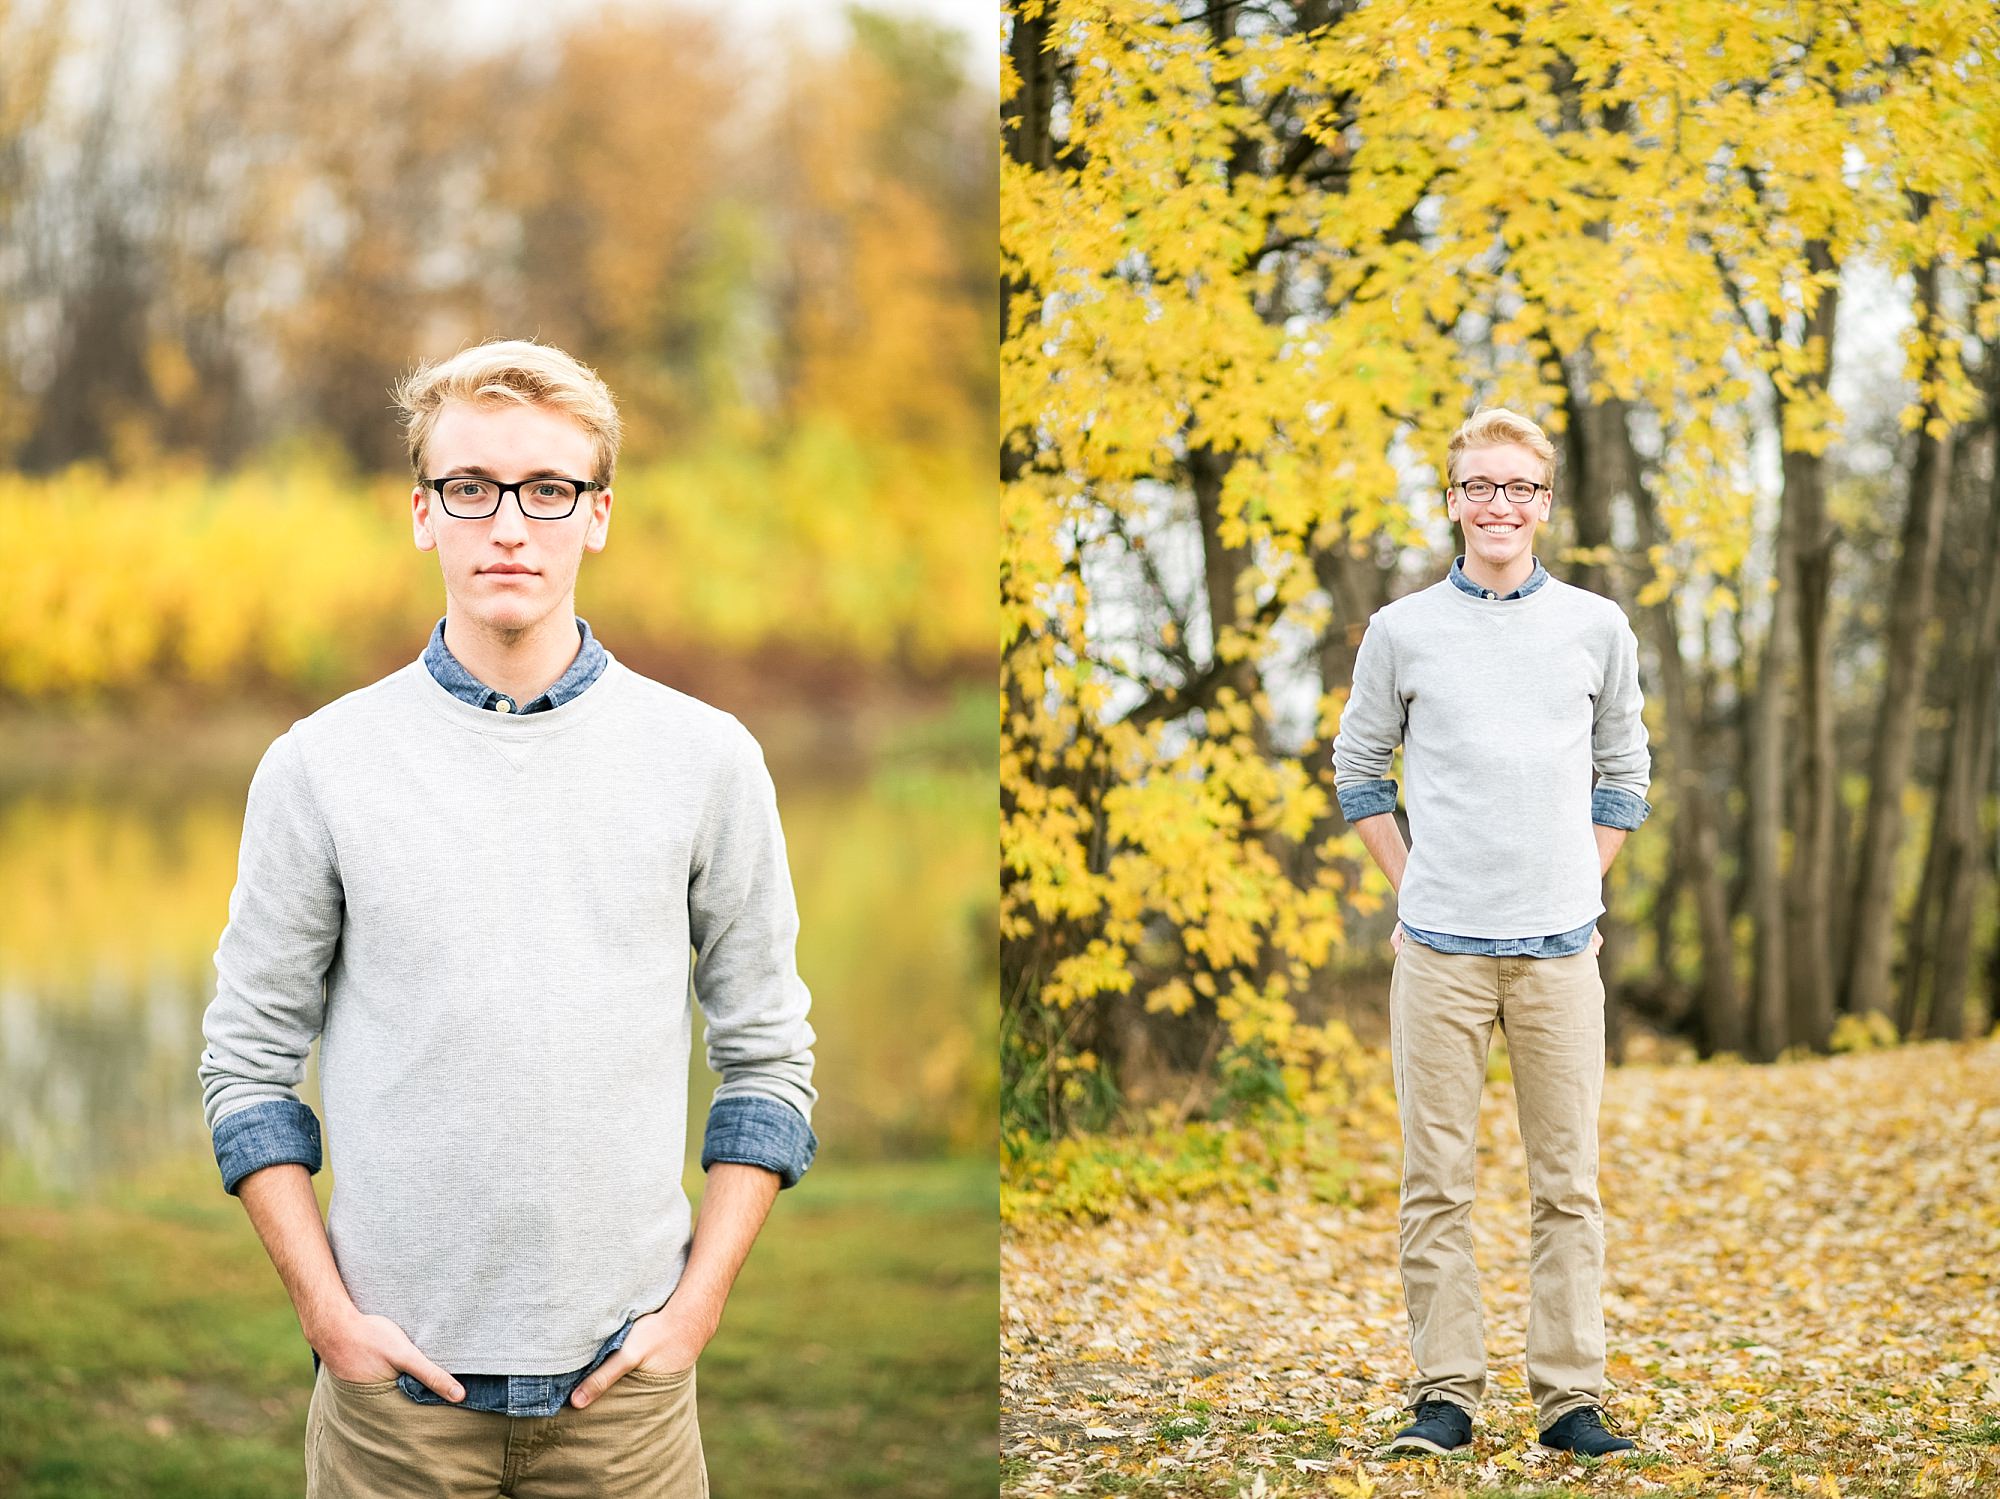 High School Senior in Khakis and a grey sweater stands in front of bright yellow fall leaves